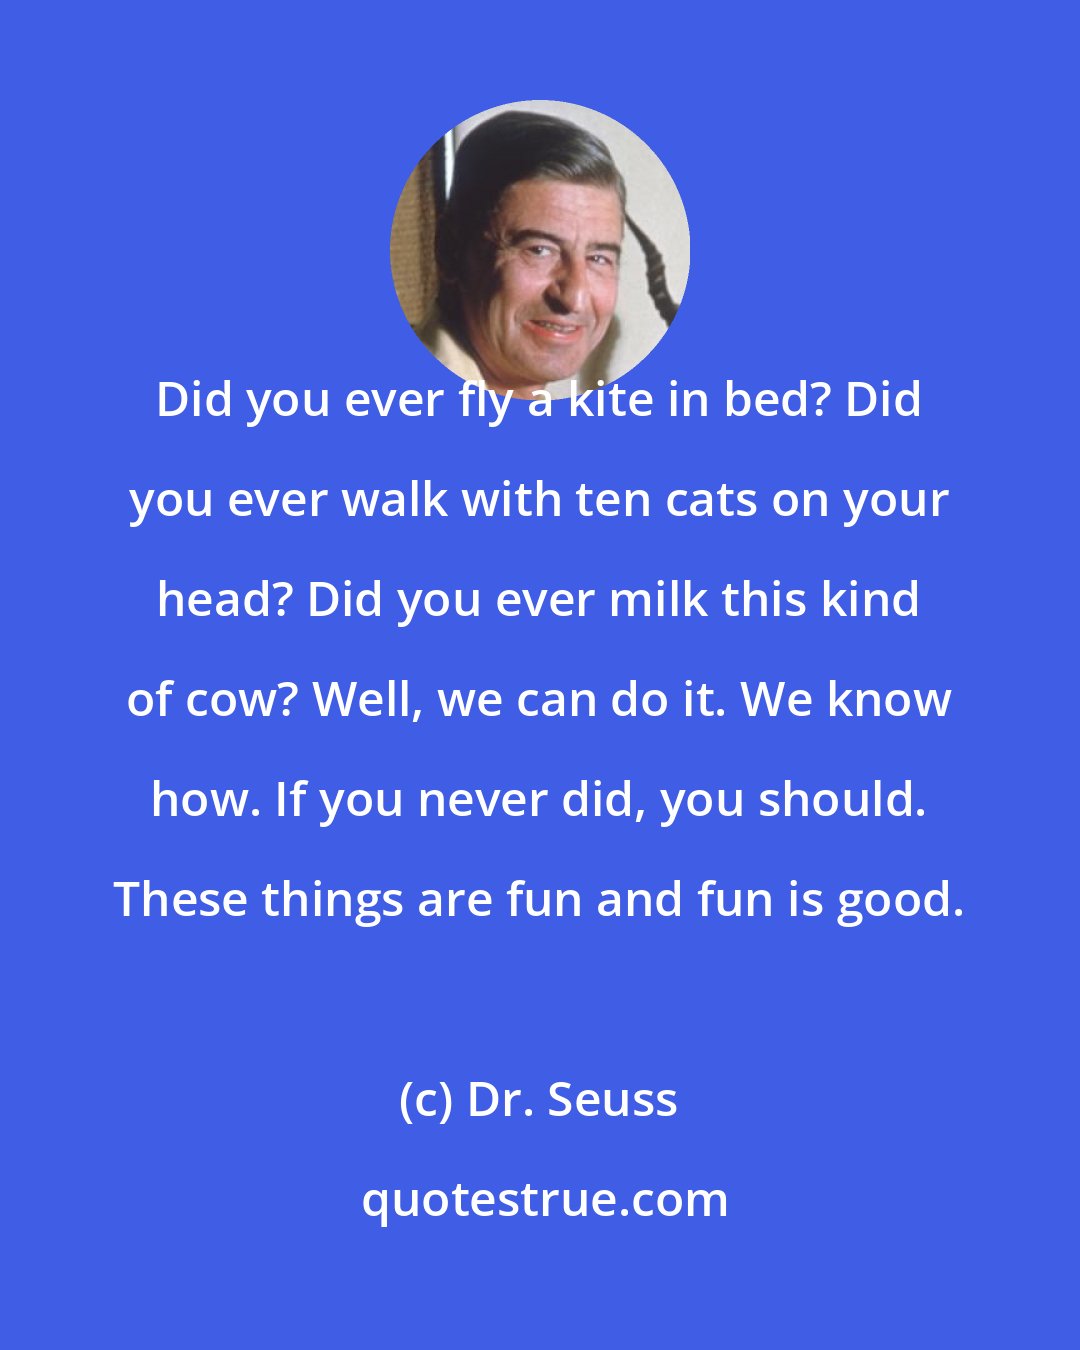 Dr. Seuss: Did you ever fly a kite in bed? Did you ever walk with ten cats on your head? Did you ever milk this kind of cow? Well, we can do it. We know how. If you never did, you should. These things are fun and fun is good.